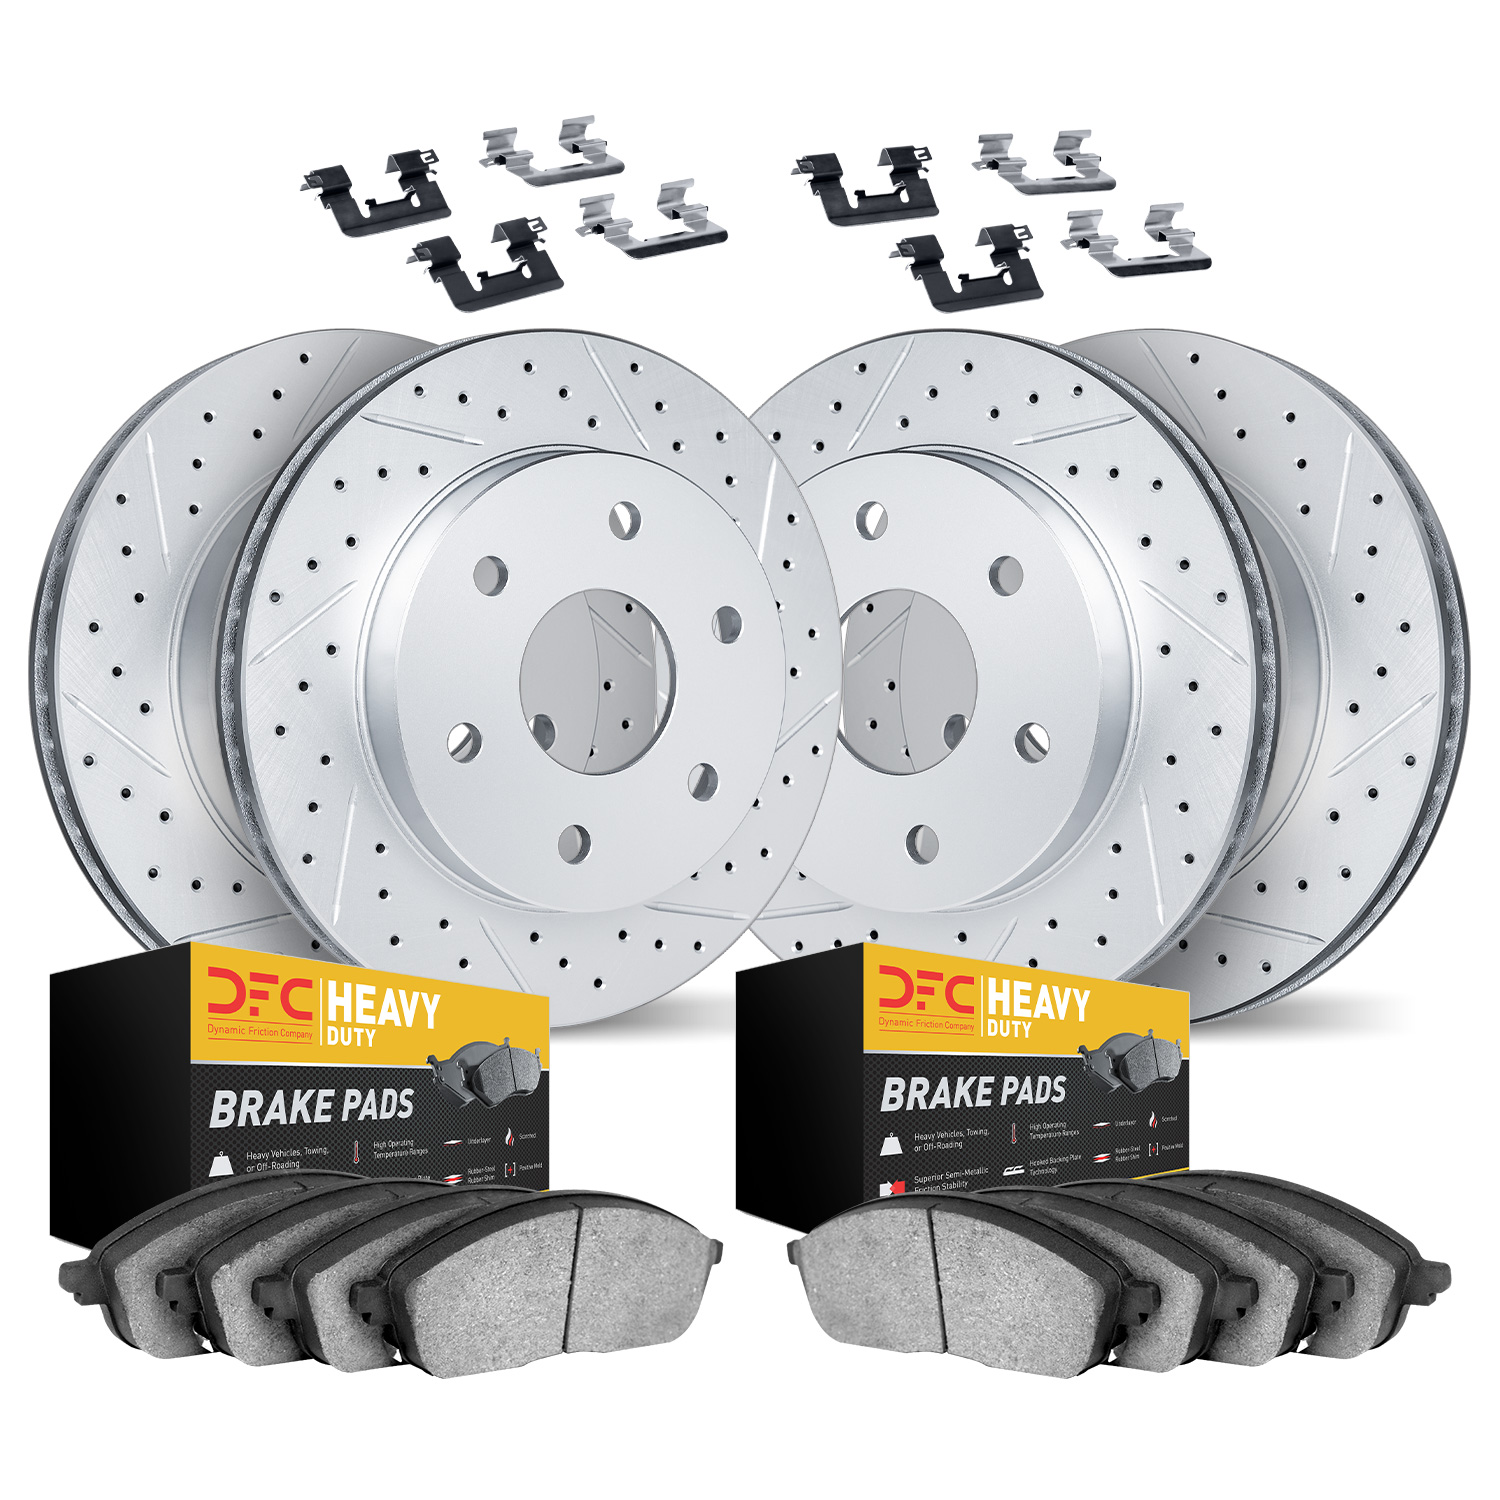 2214-99067 Geoperformance Drilled/Slotted Rotors w/Heavy-Duty Pads Kit & Hardware, 2004-2008 Ford/Lincoln/Mercury/Mazda, Positio